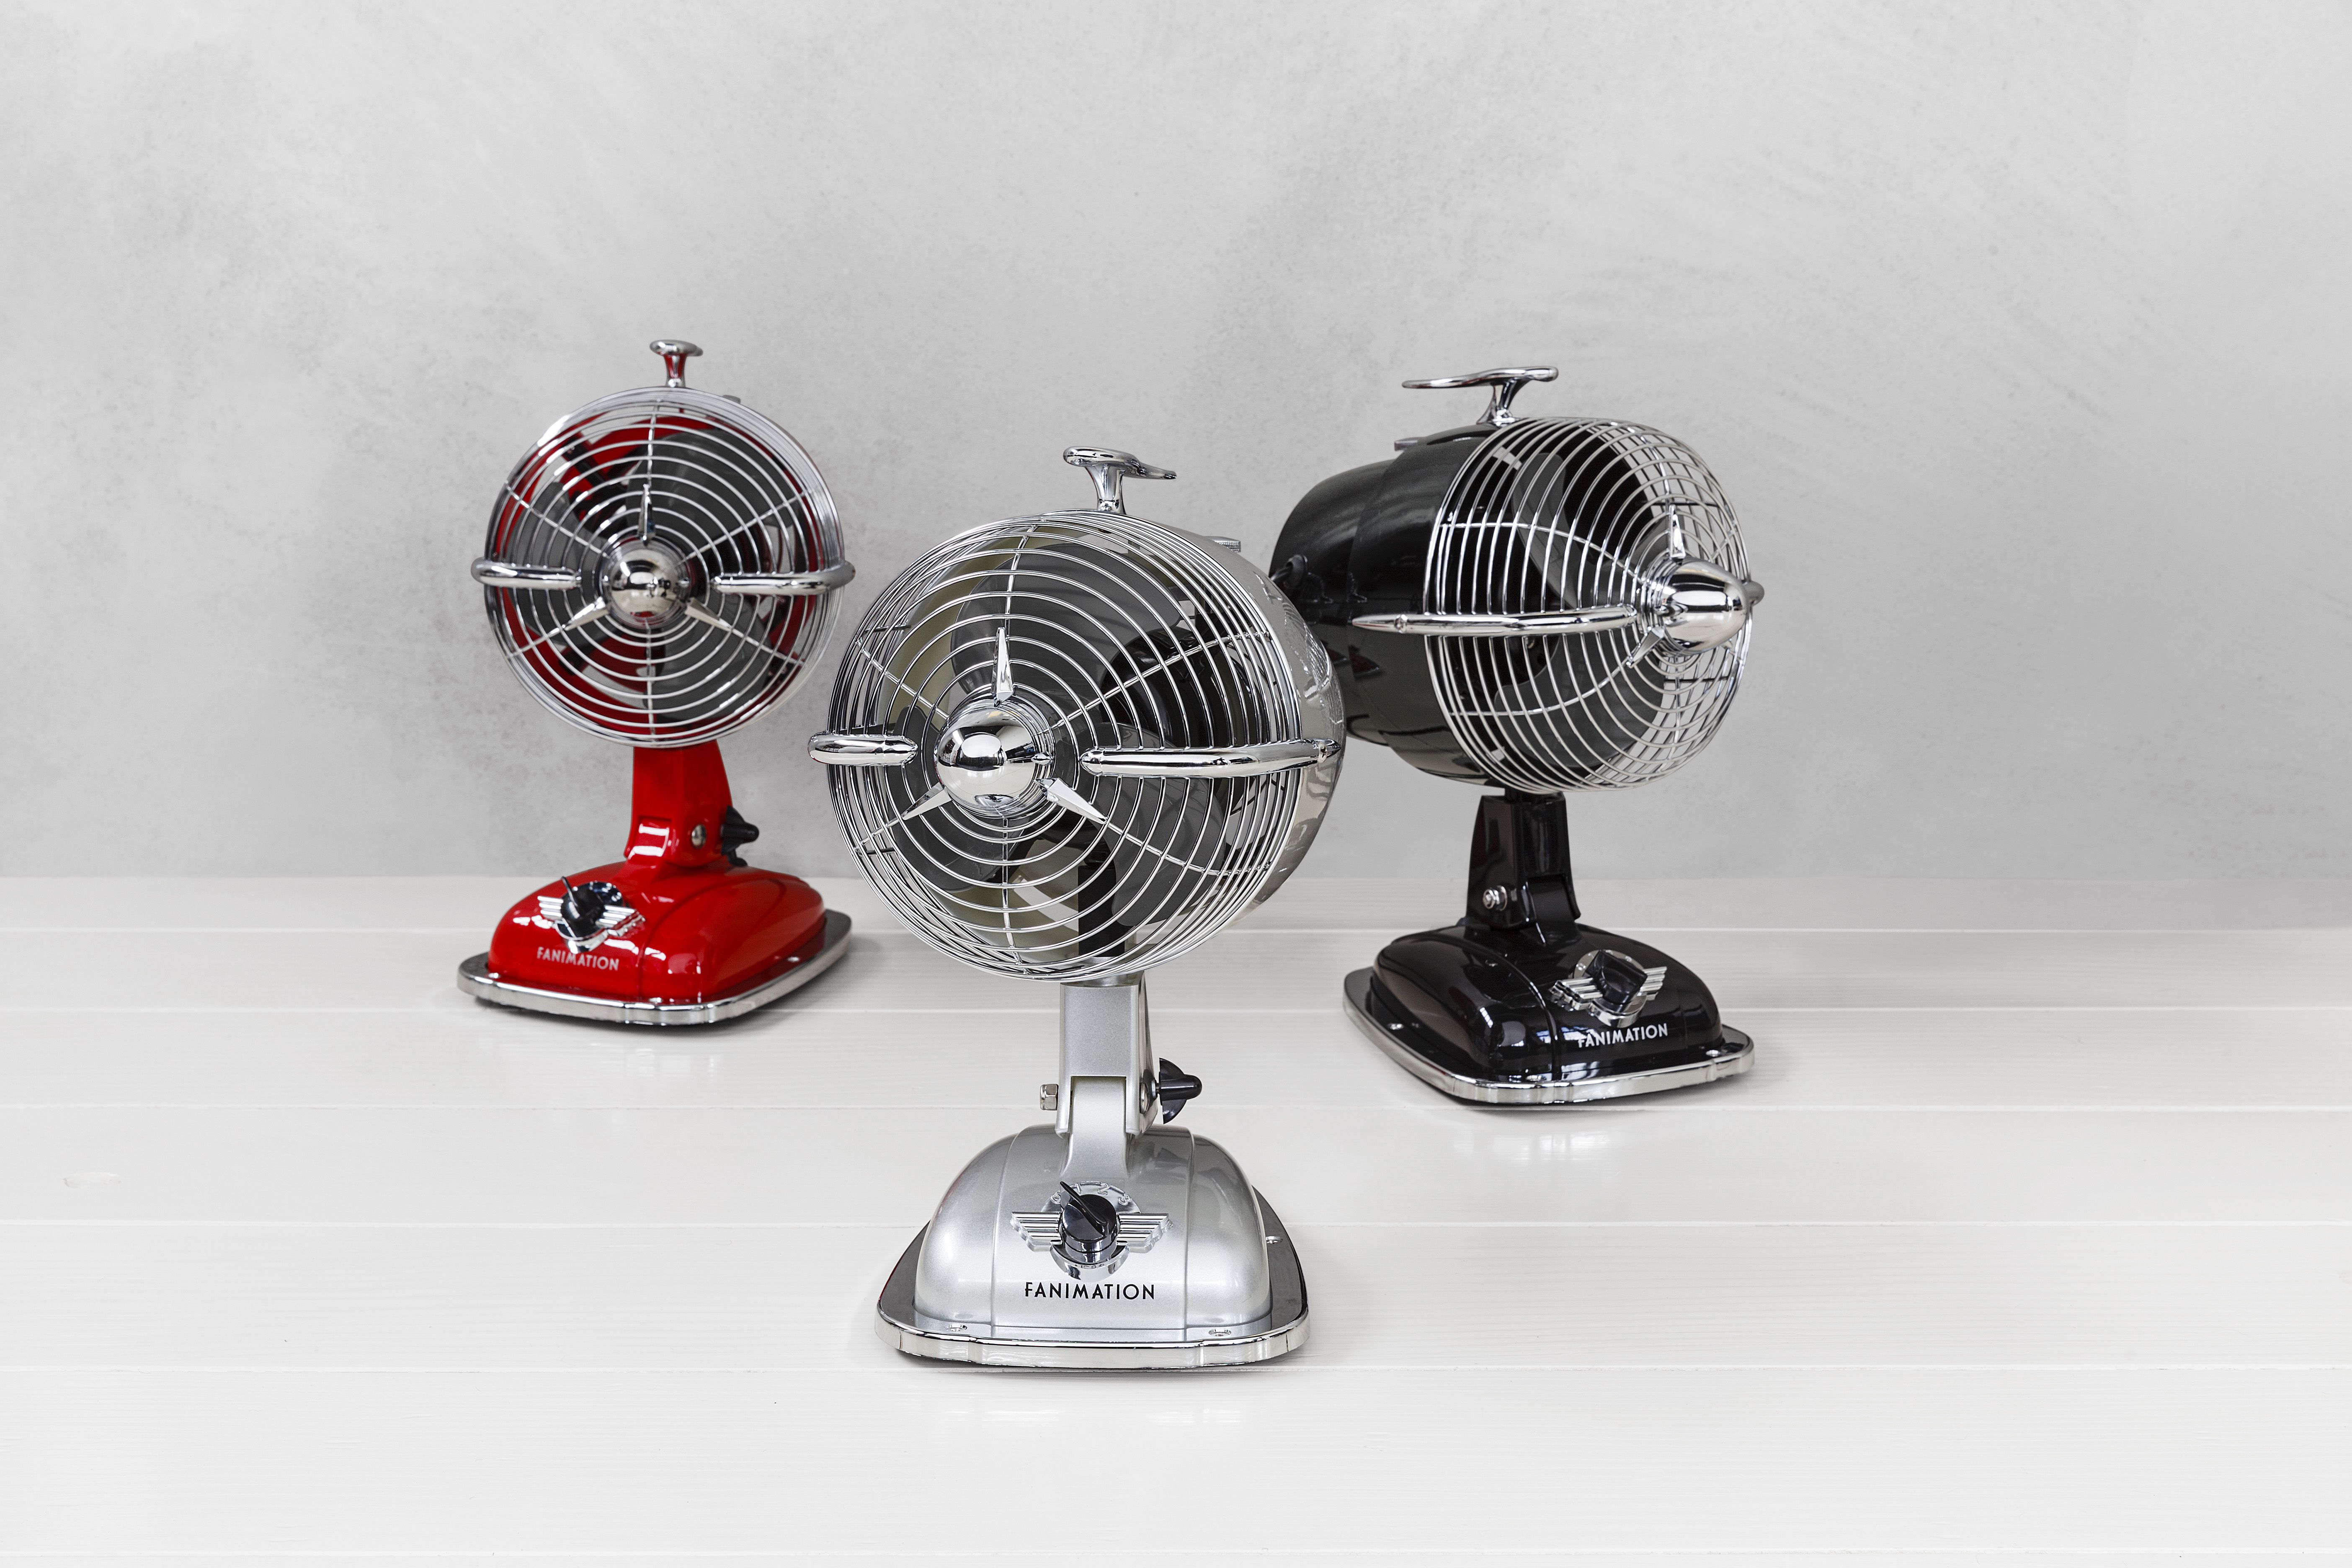 The Best Table And Desk Fans According To Experts The